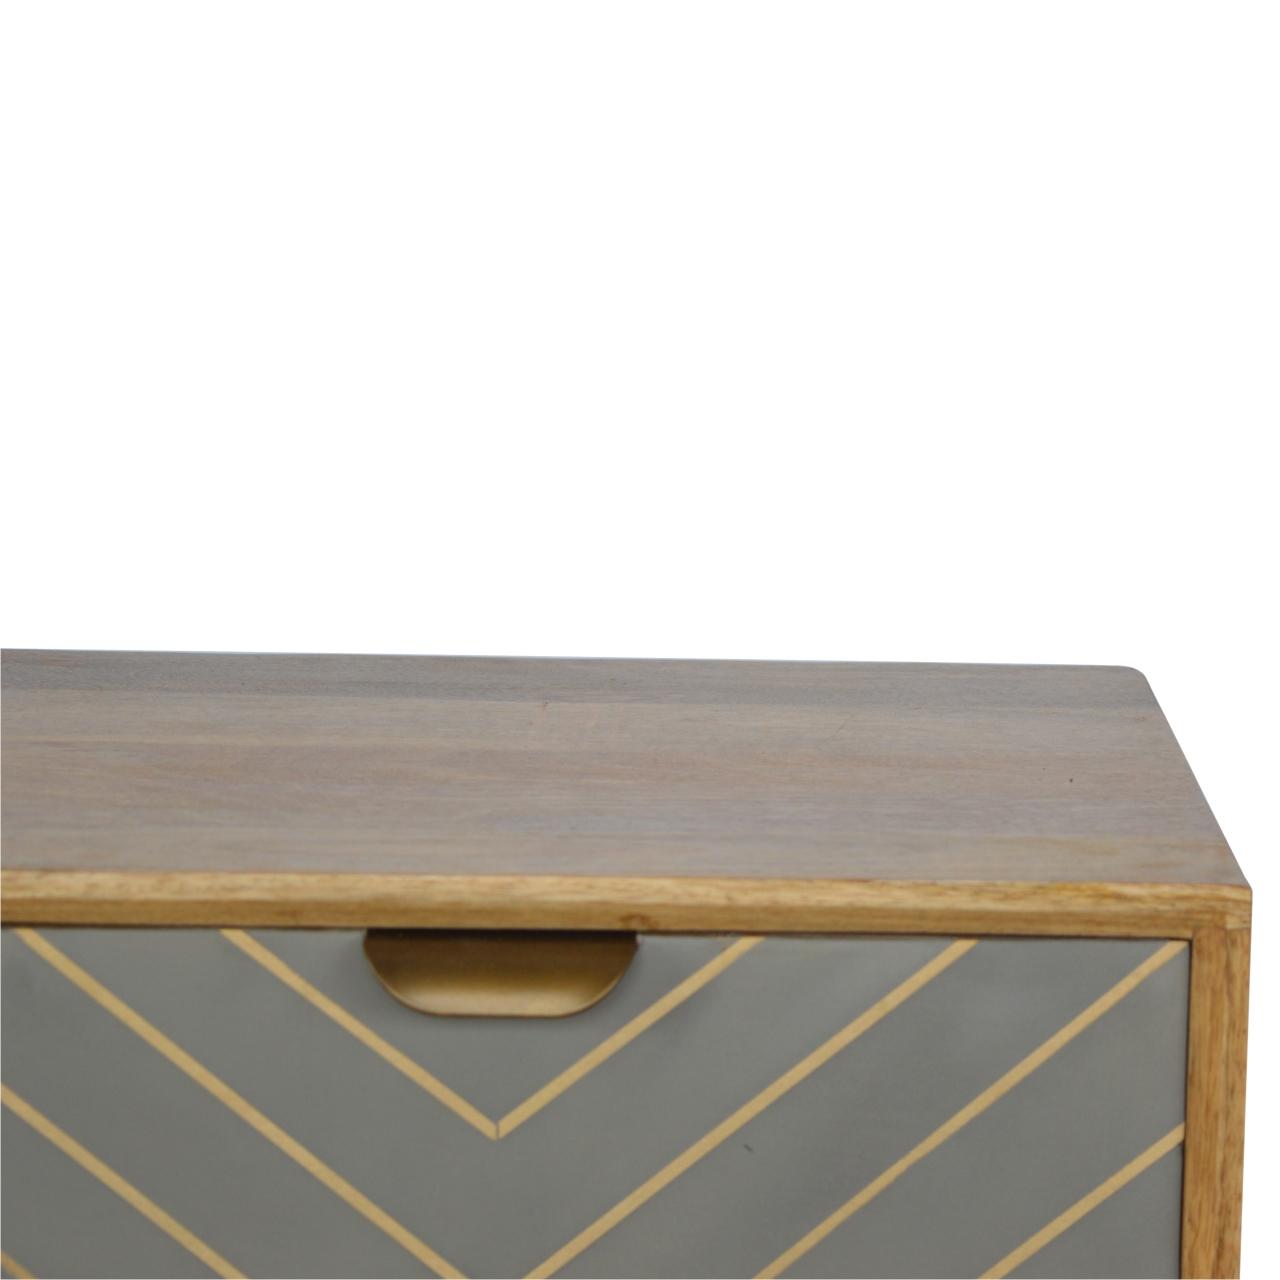 Sleek Cement Brass Inlay Bedside With Open Slot